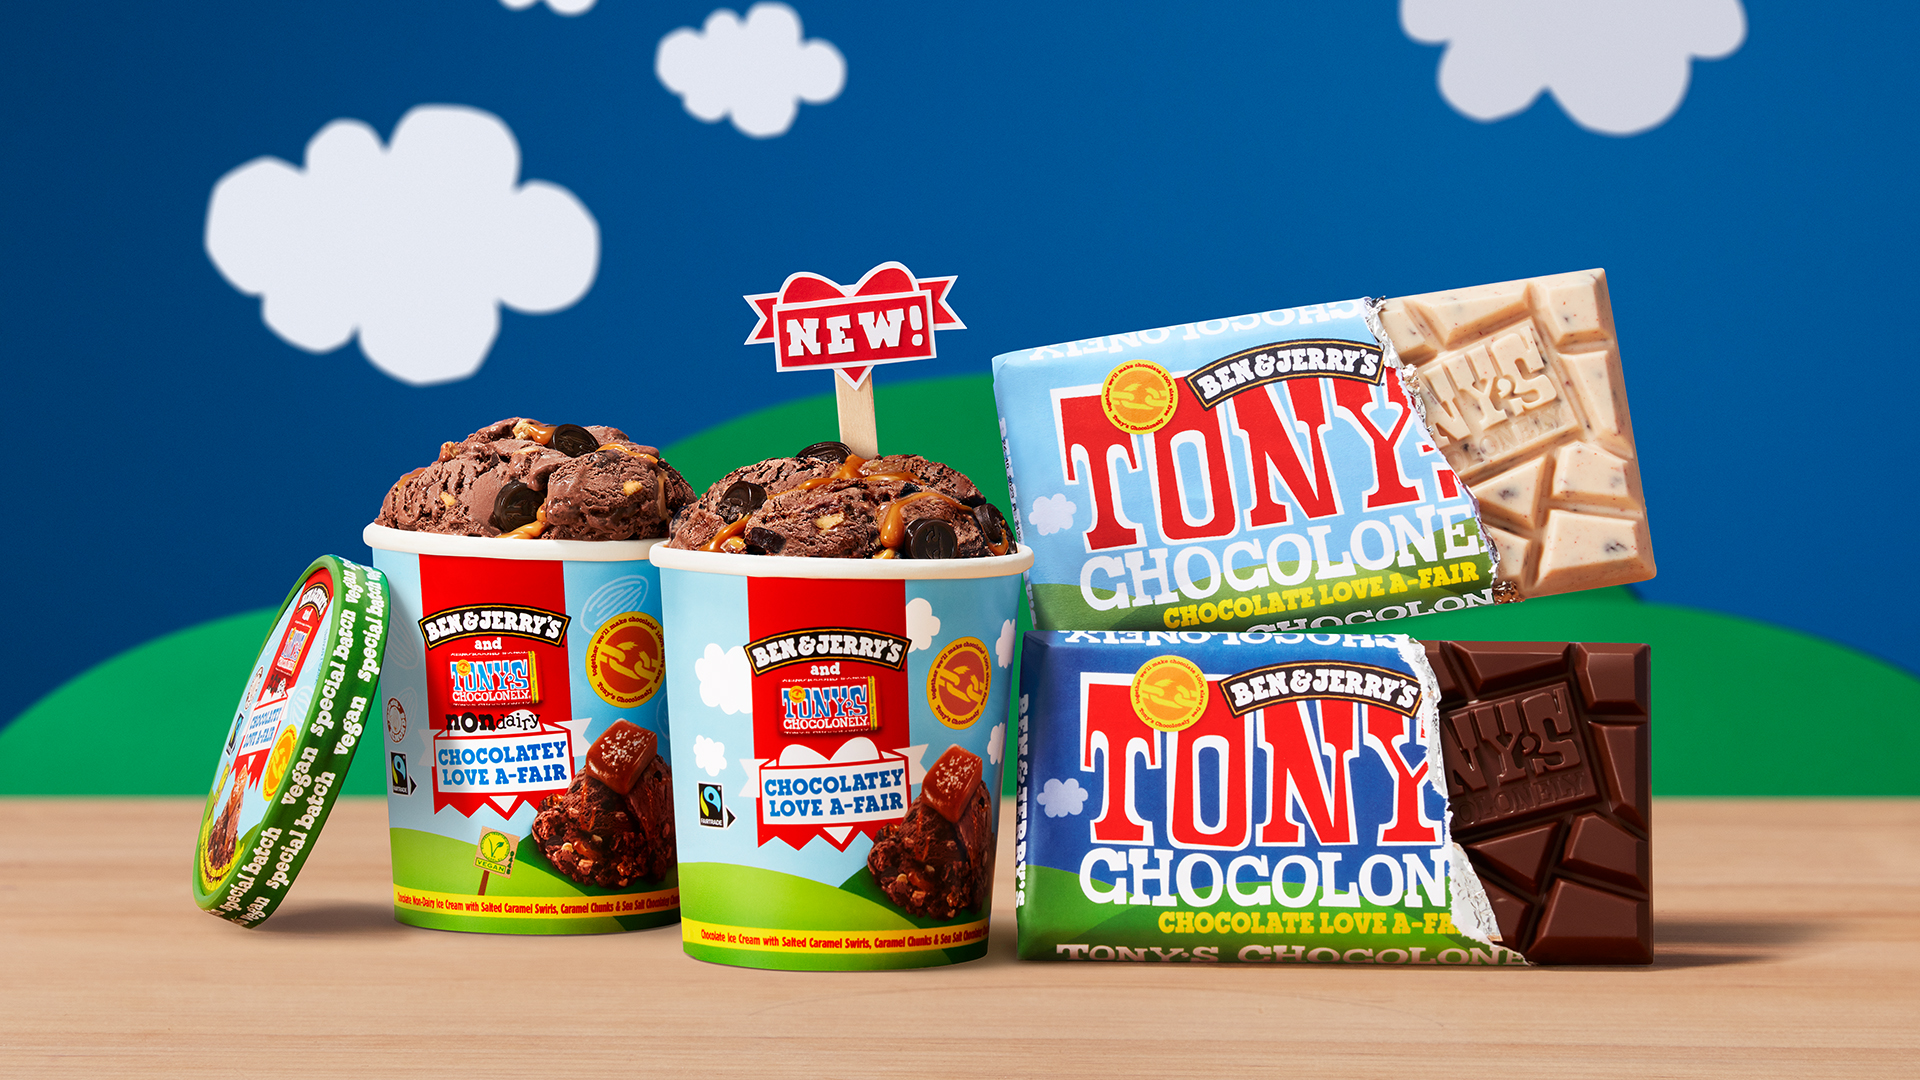 You are currently viewing Ben & Jerry’s joins forces with tony’s chocolonely to make chocolate 100% slave free